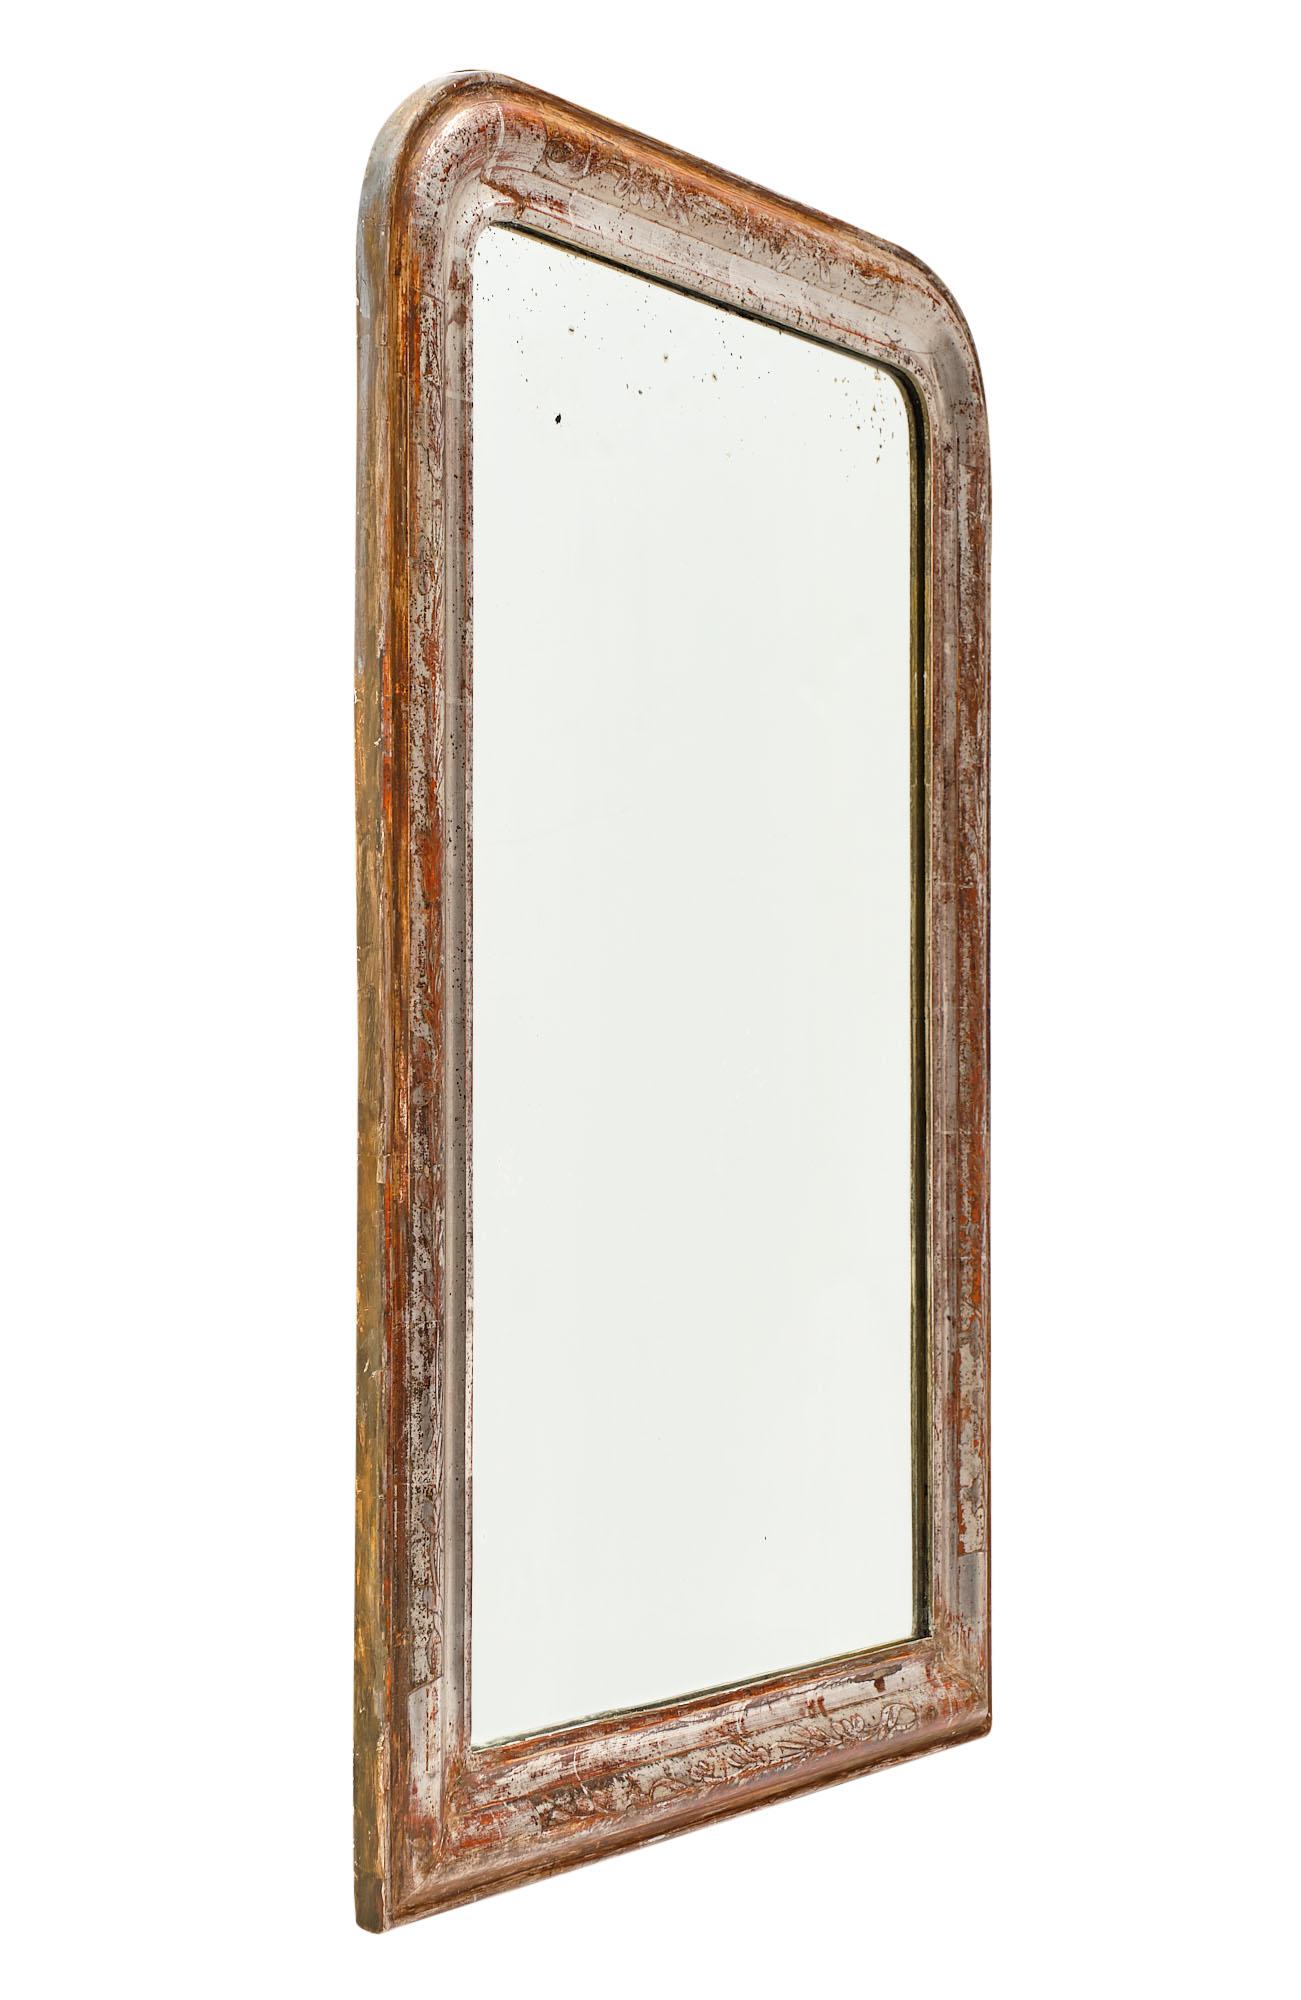 French Louis Philippe period mirror made of wood and gesso. The hand-chiseled frame has the original silver leaf and sienna colored glaze showing through. The heavy patina on this piece makes it especially warm and inviting.